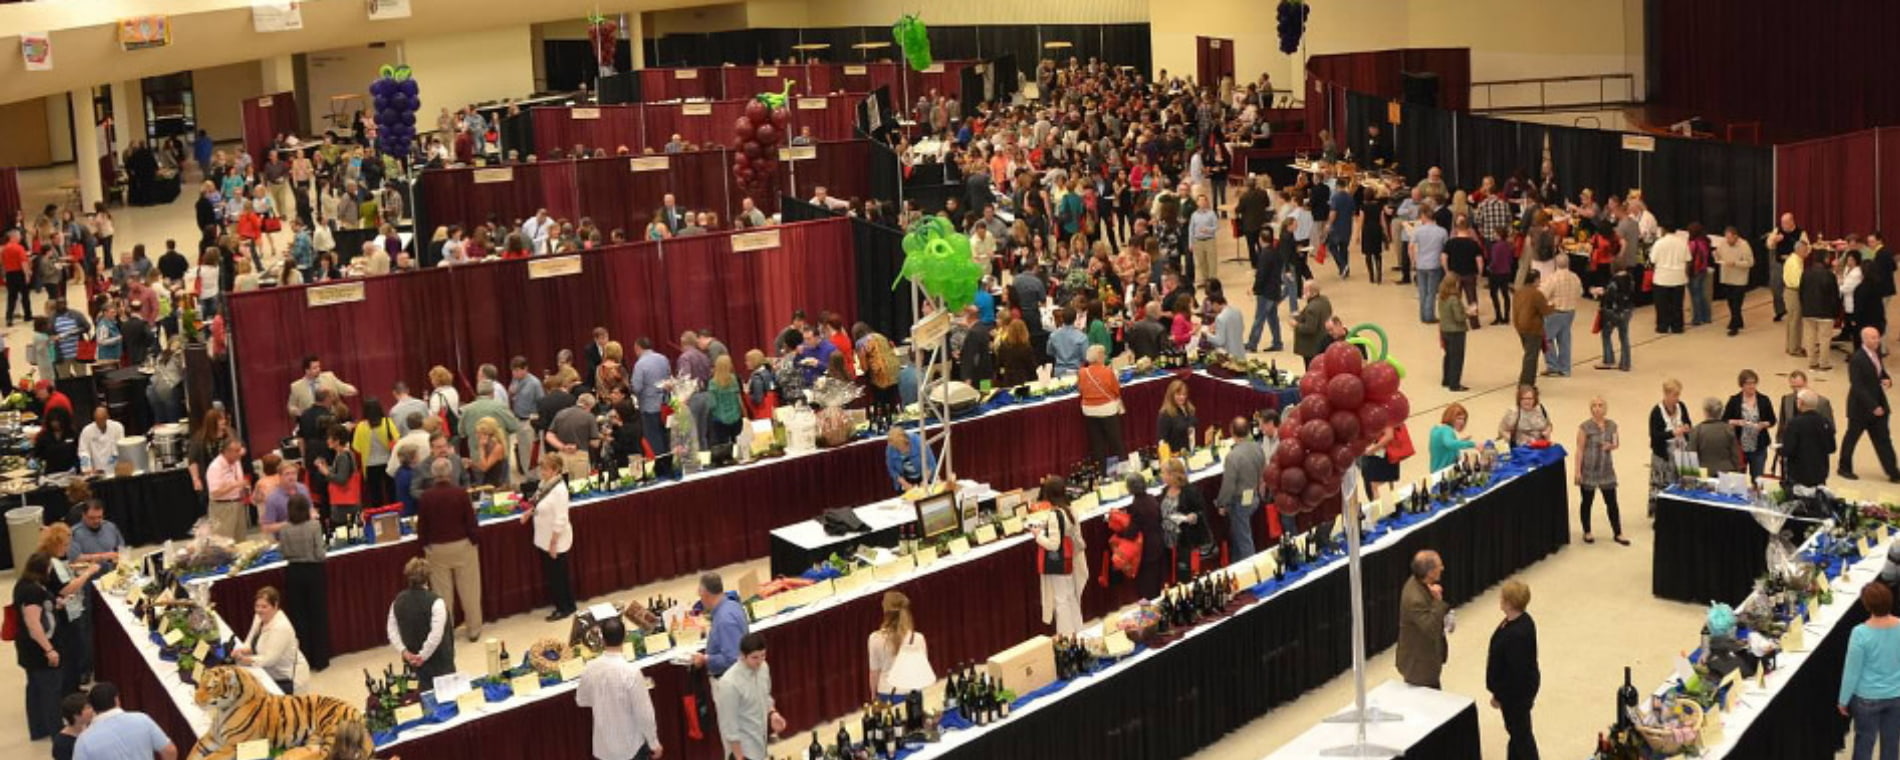 25th Annual Midwest Winefest Grand Tasting Reserve Room